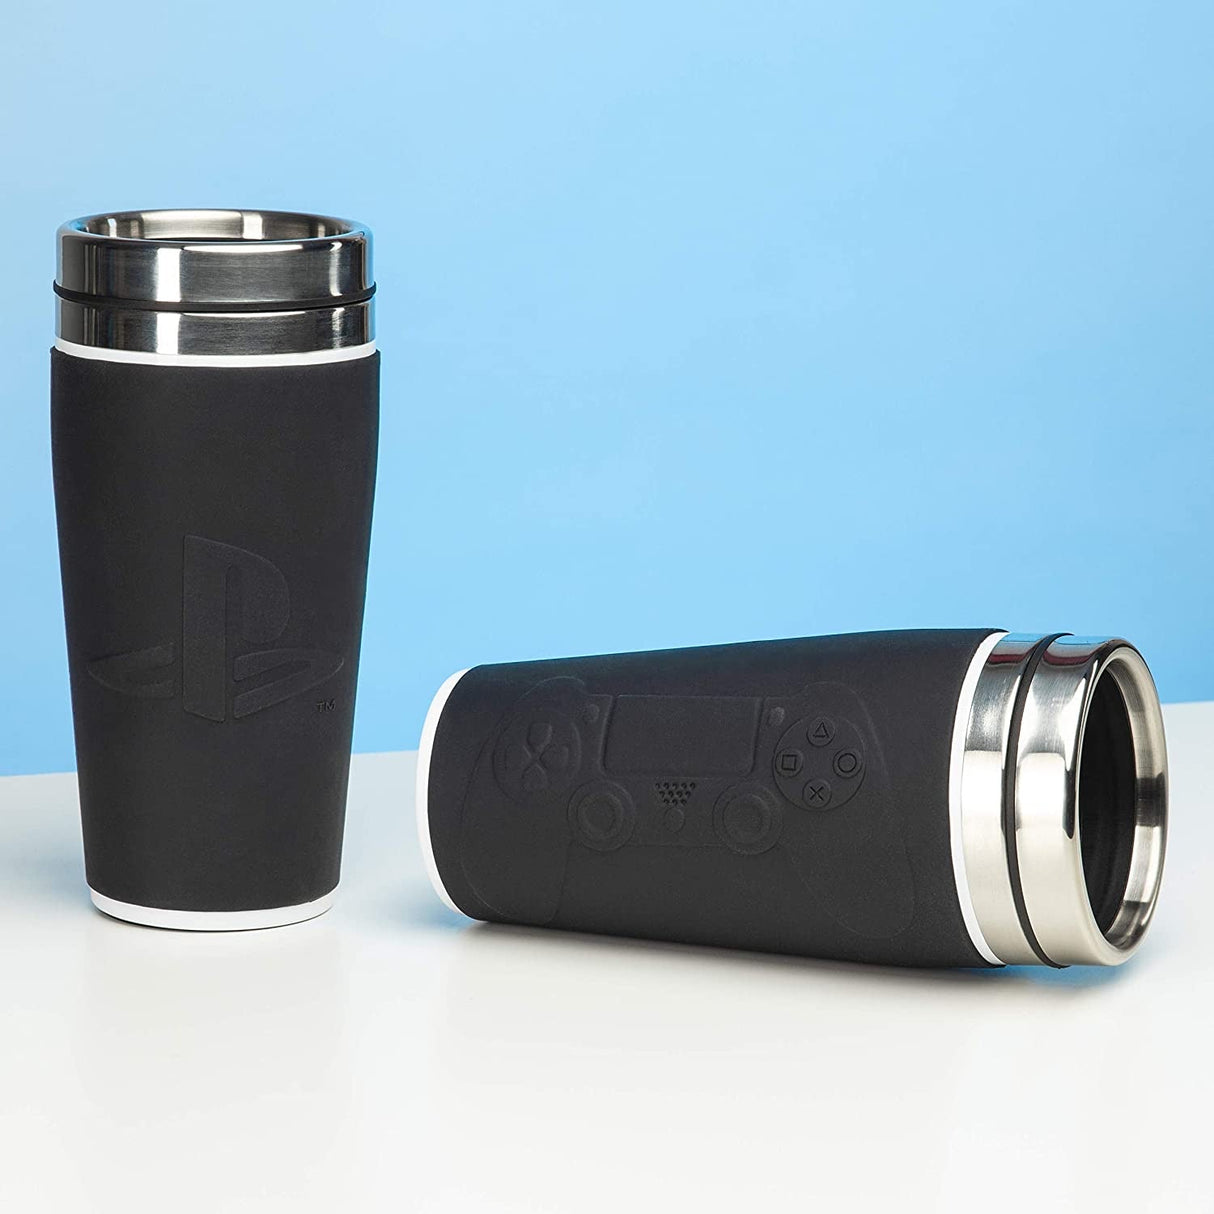 Paladone Playstation Controller Travel Mug Stainless Steel - Level UpLevel UpLight Accessories5055964742133